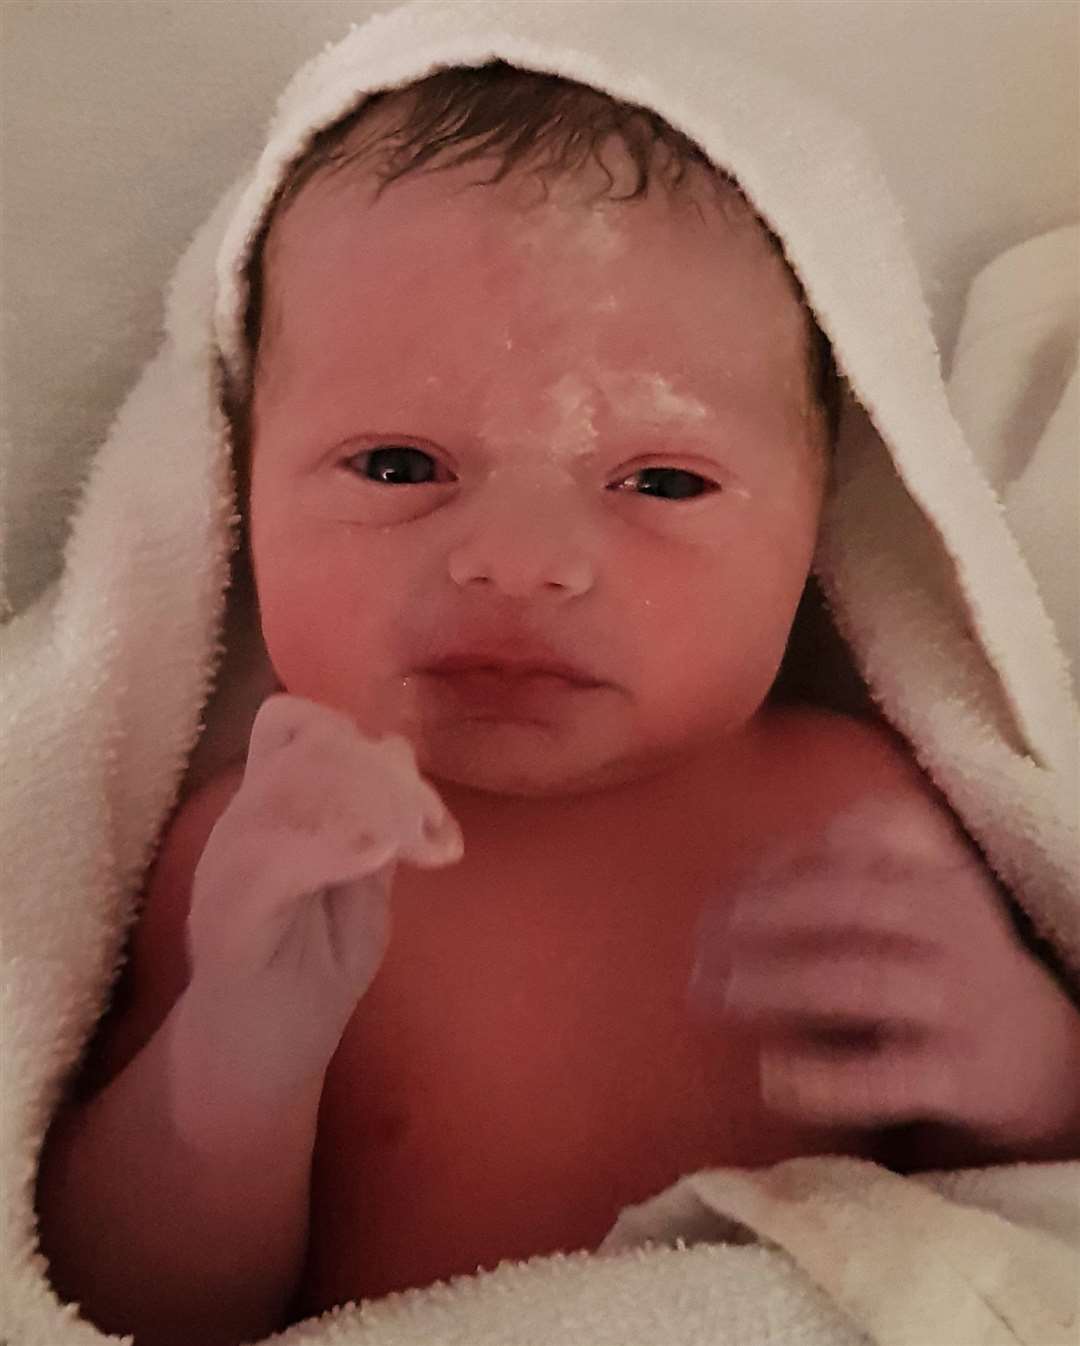 Little Archie Powell died just four days after his birth